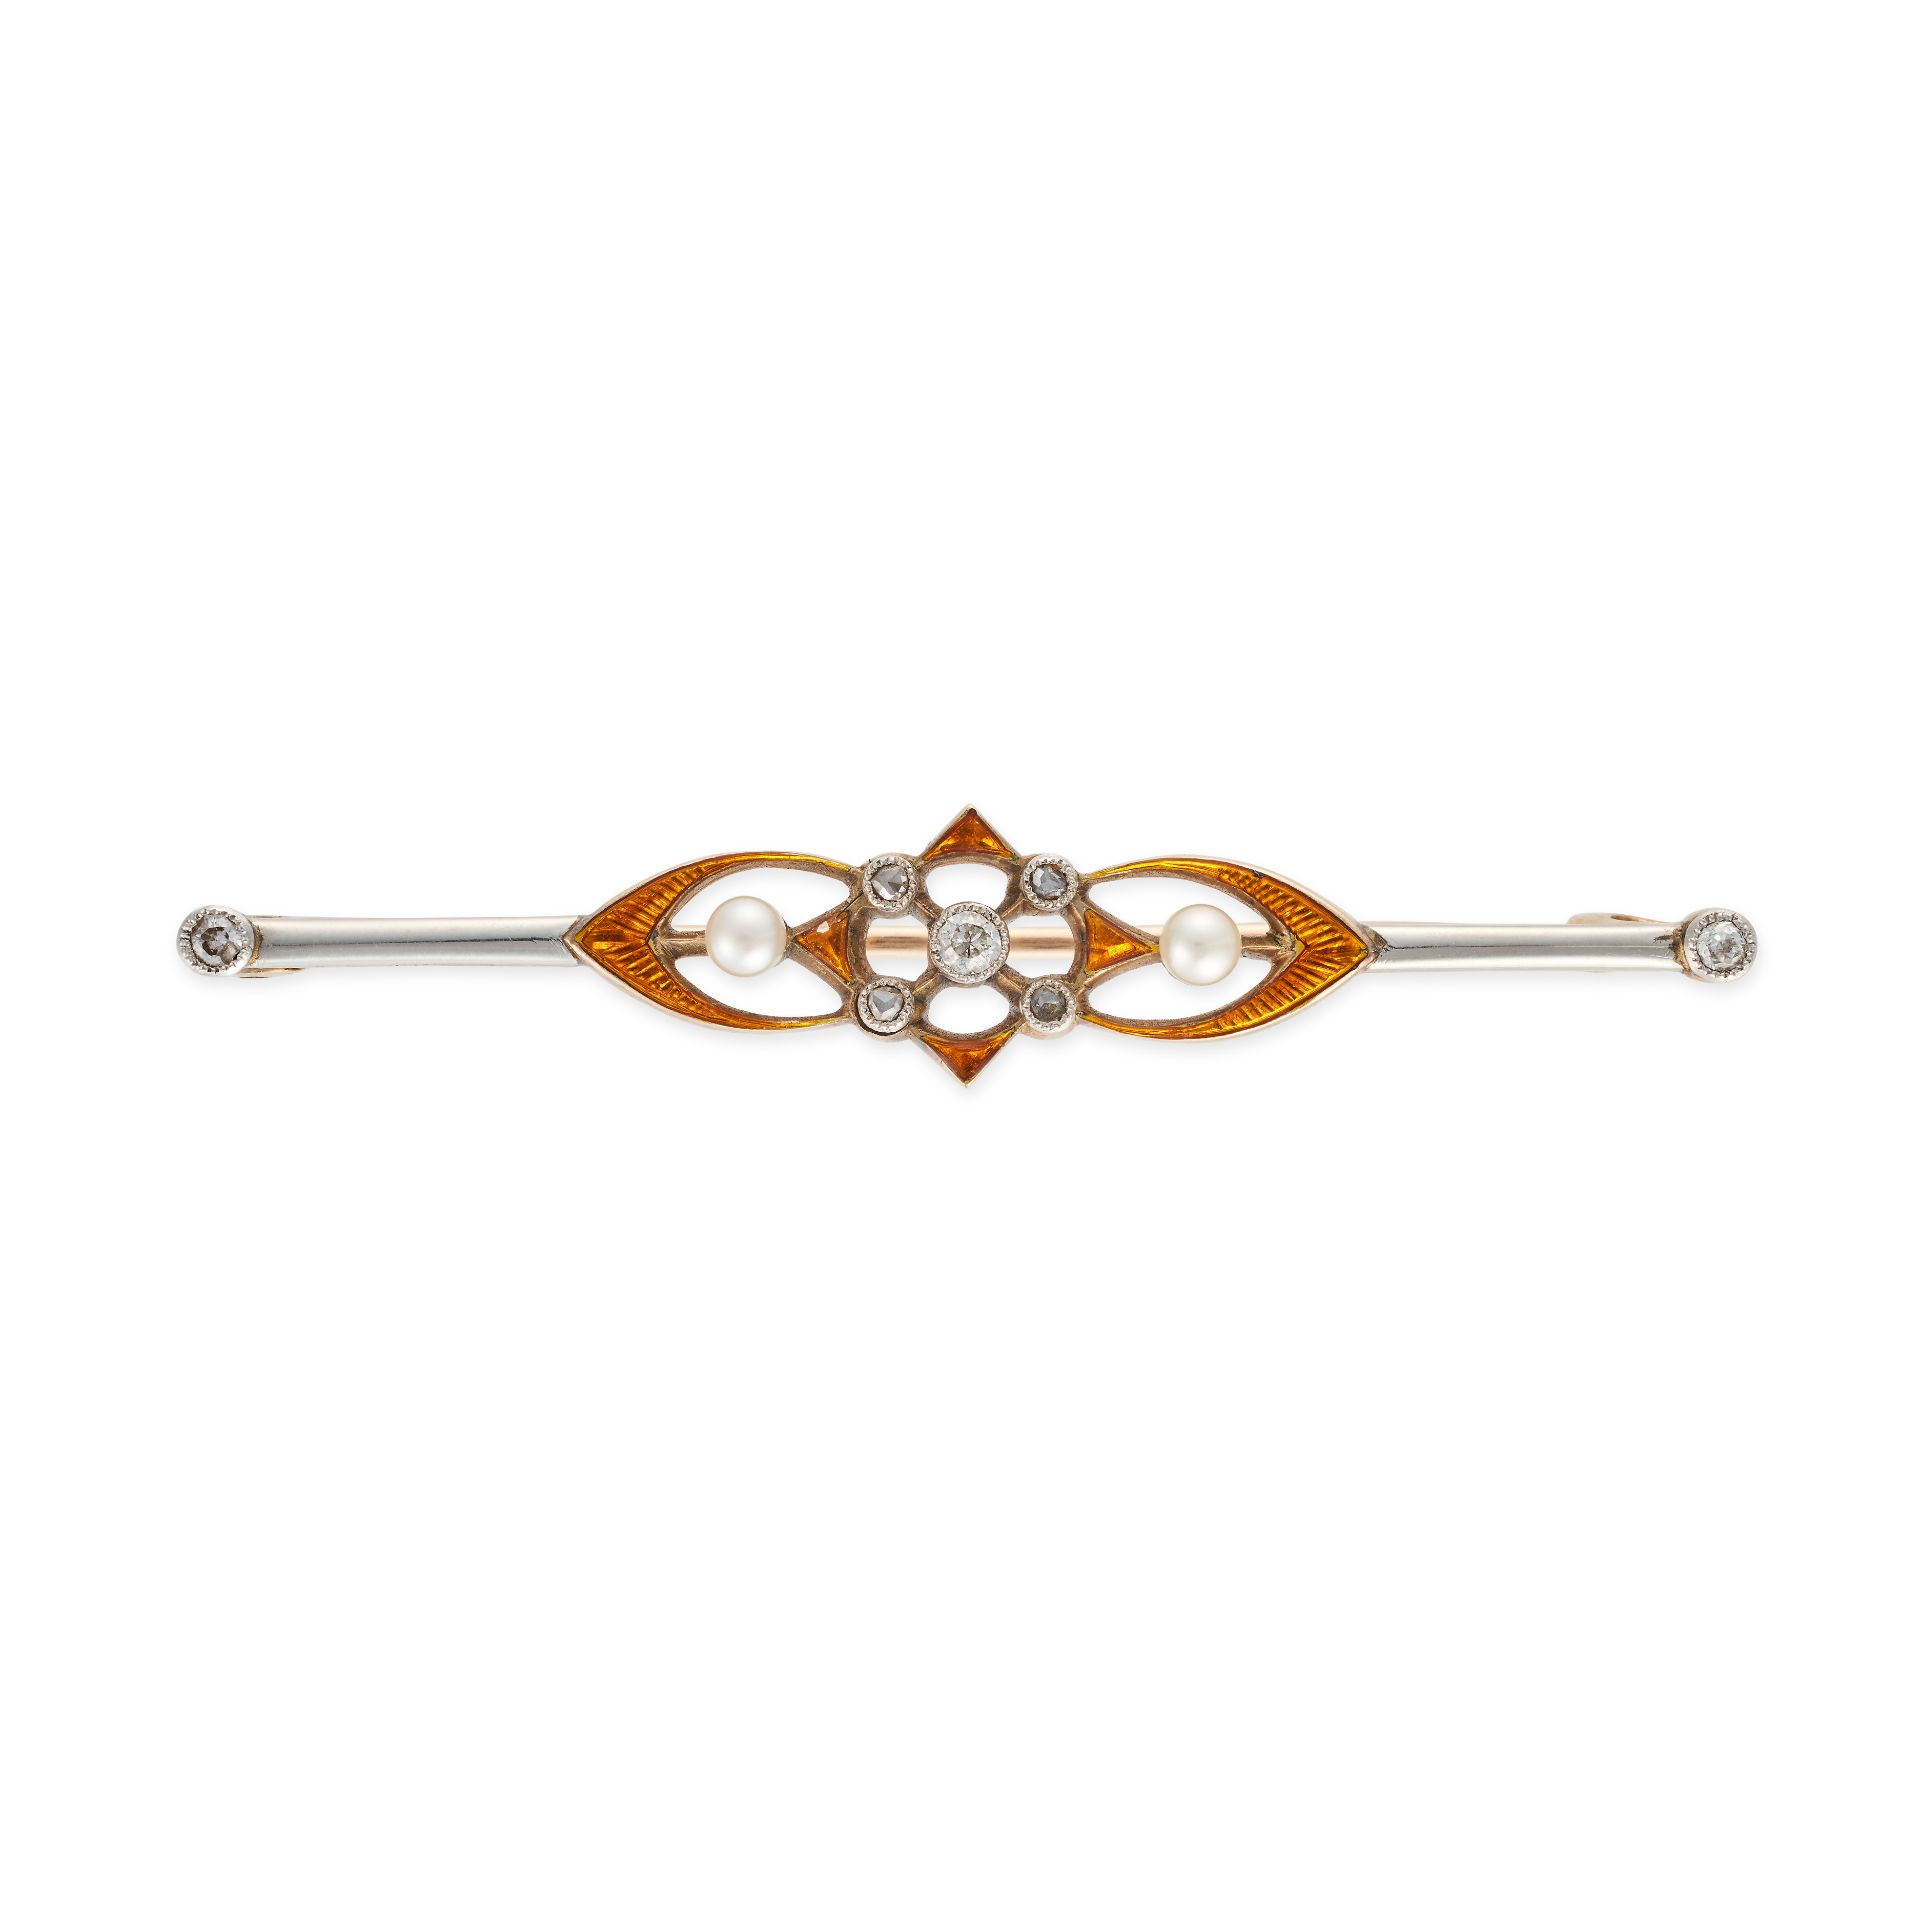 AN ANTIQUE DIAMOND, ENAMEL AND PEARL BAR BROOCH, EARLY 20TH CENTURY set with old and rose cut dia...